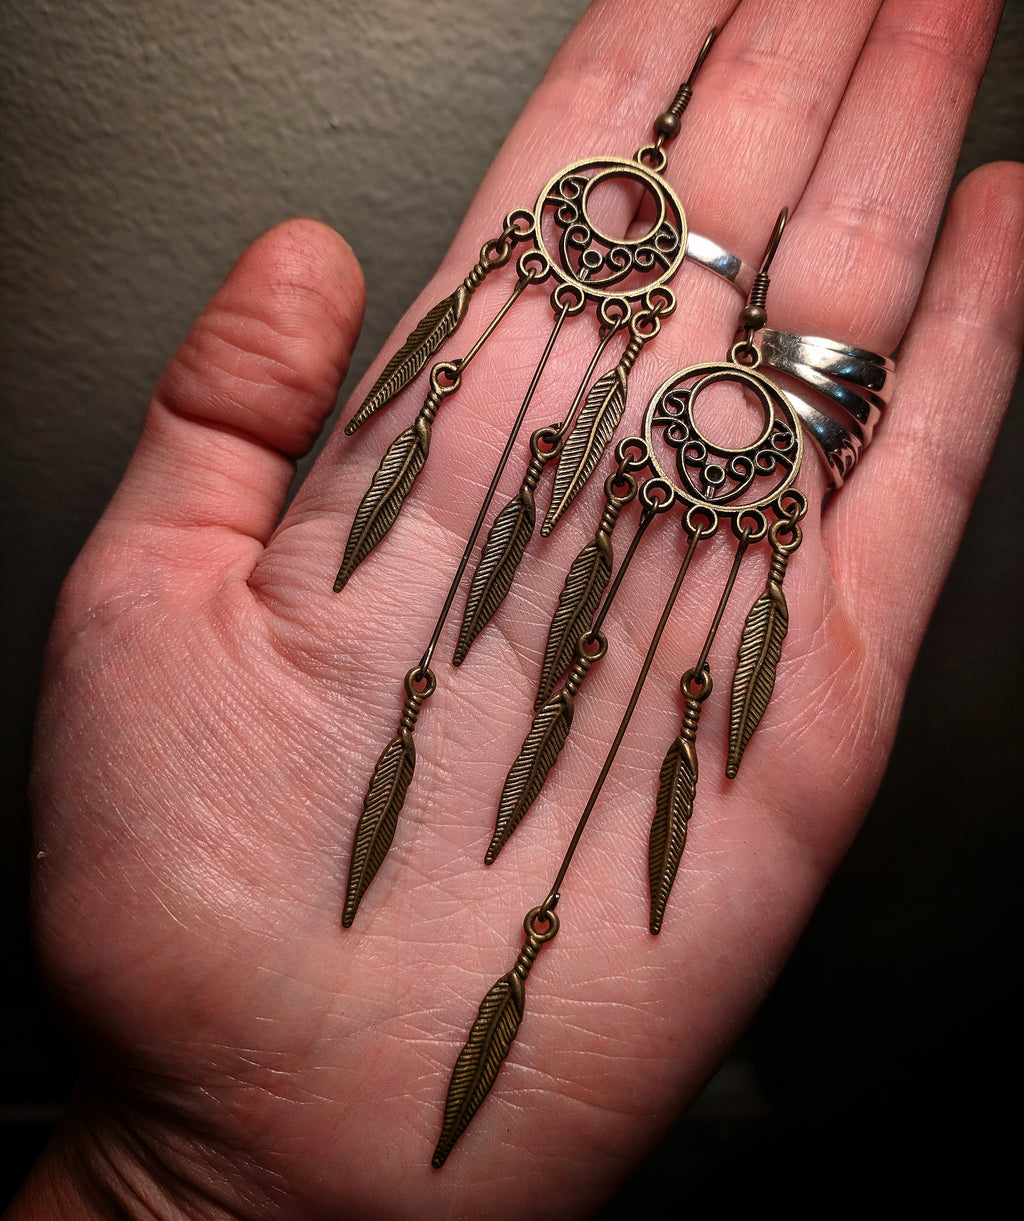 Super Long Dramatic Bronze Brass Colored Dreamcatcher Feather Earrings With Surgical Stainless Steel Ear Hooks